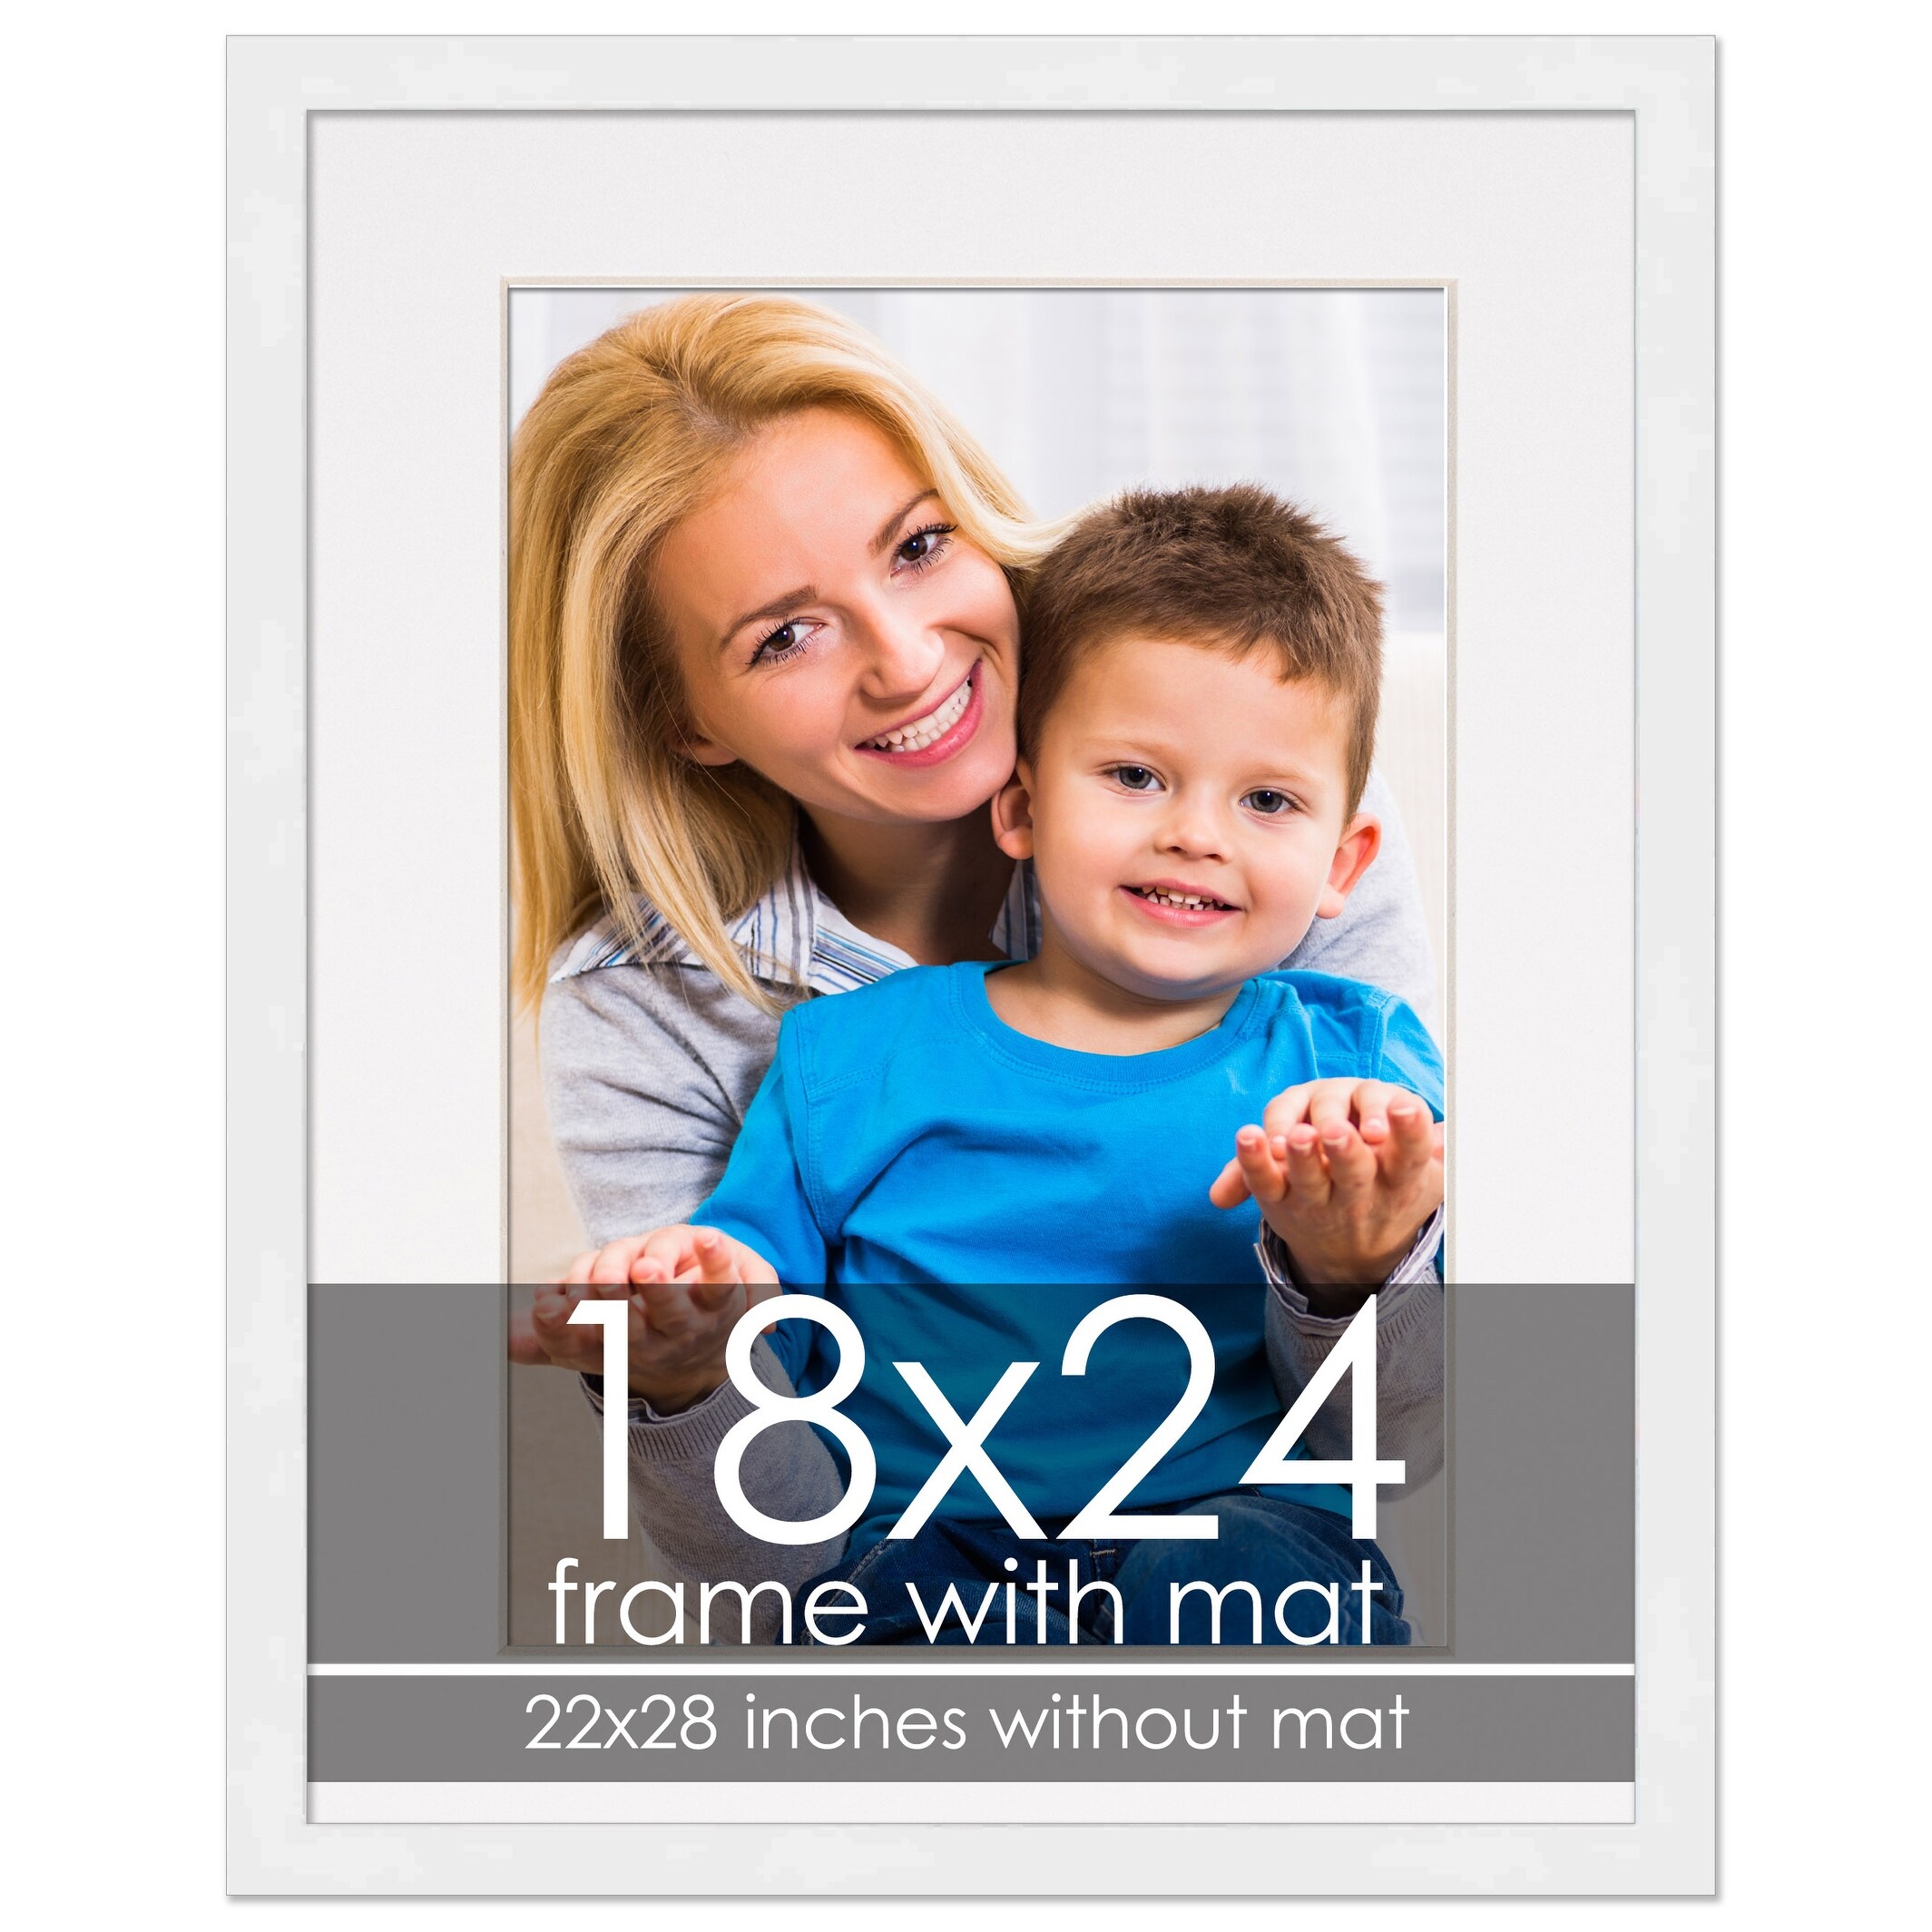 18x24 Mat for 13x19 Photo - Baby Blue Matboard for Frames Measuring 18 x 24  Inches - To Display Art Measuring 13 x 19 Inches - Bed Bath & Beyond -  38873936